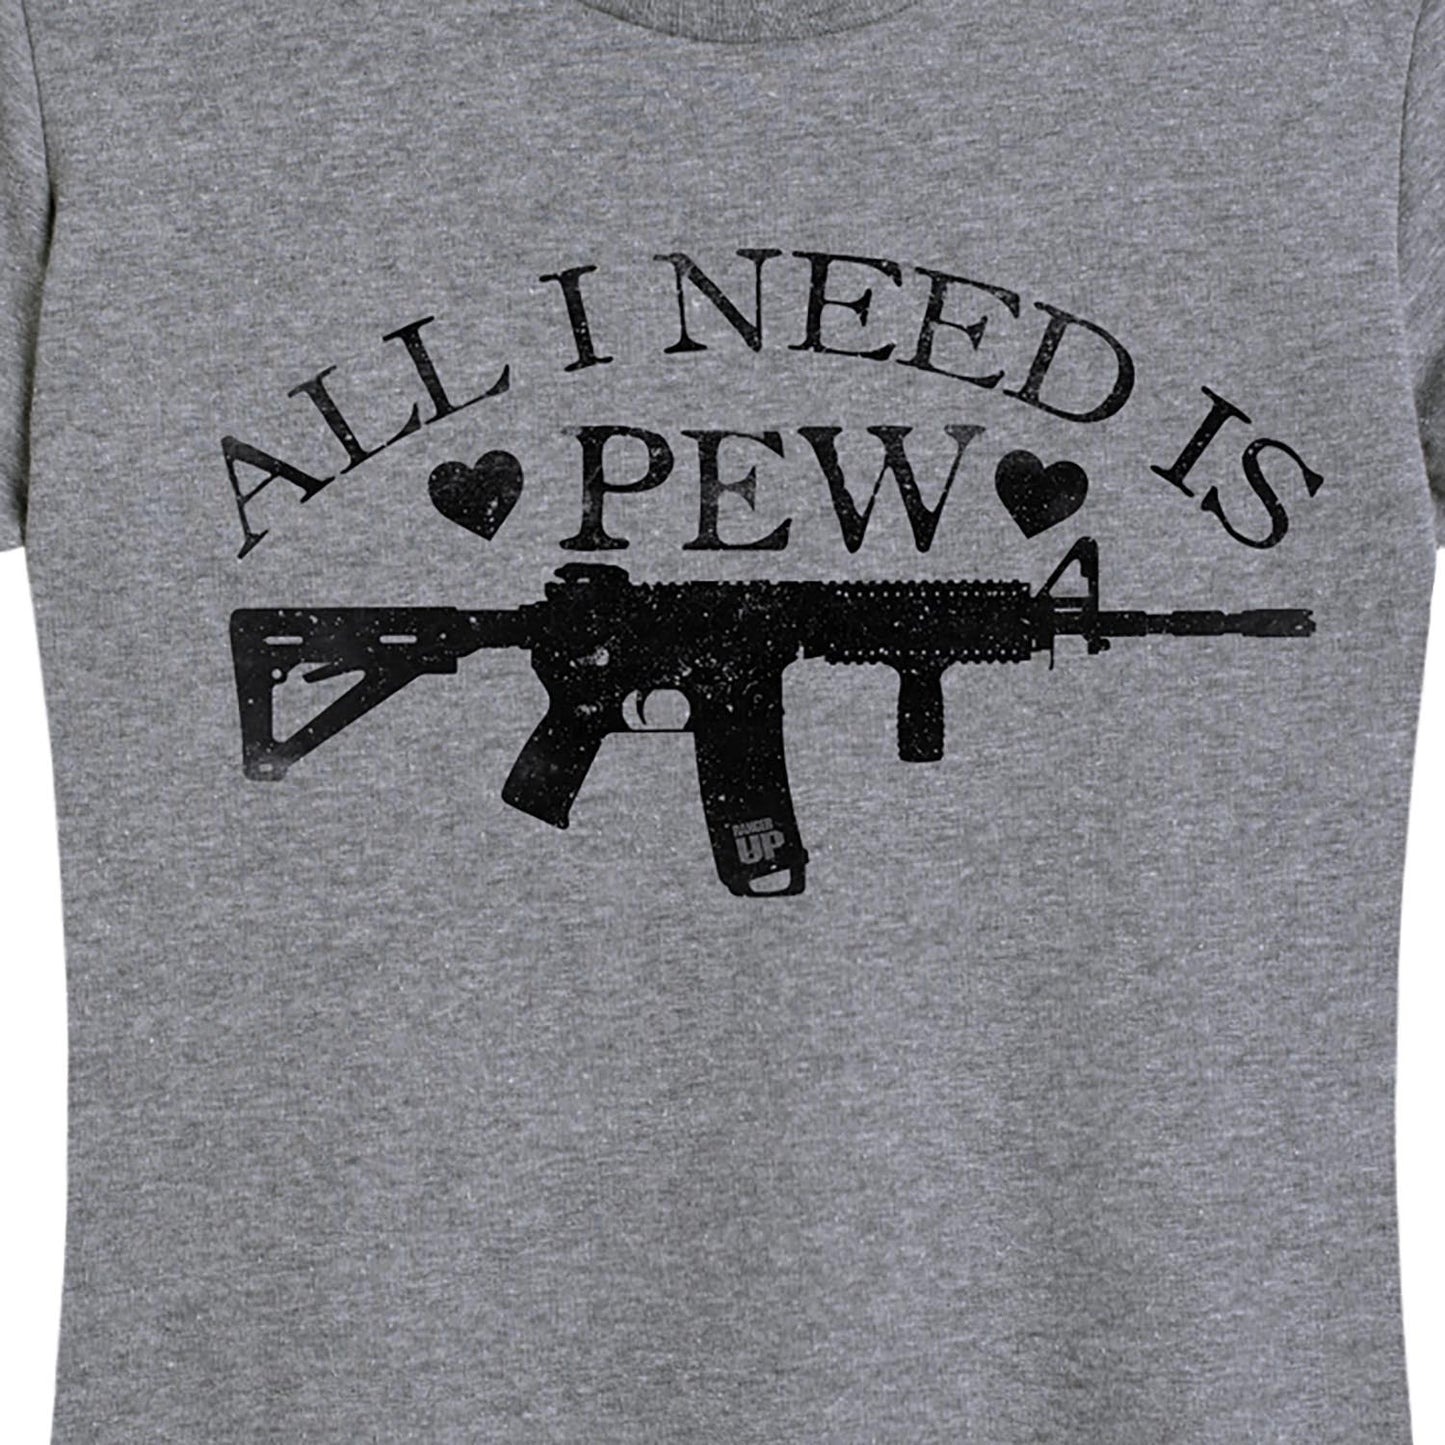 Women's All I Need is Pew Tee